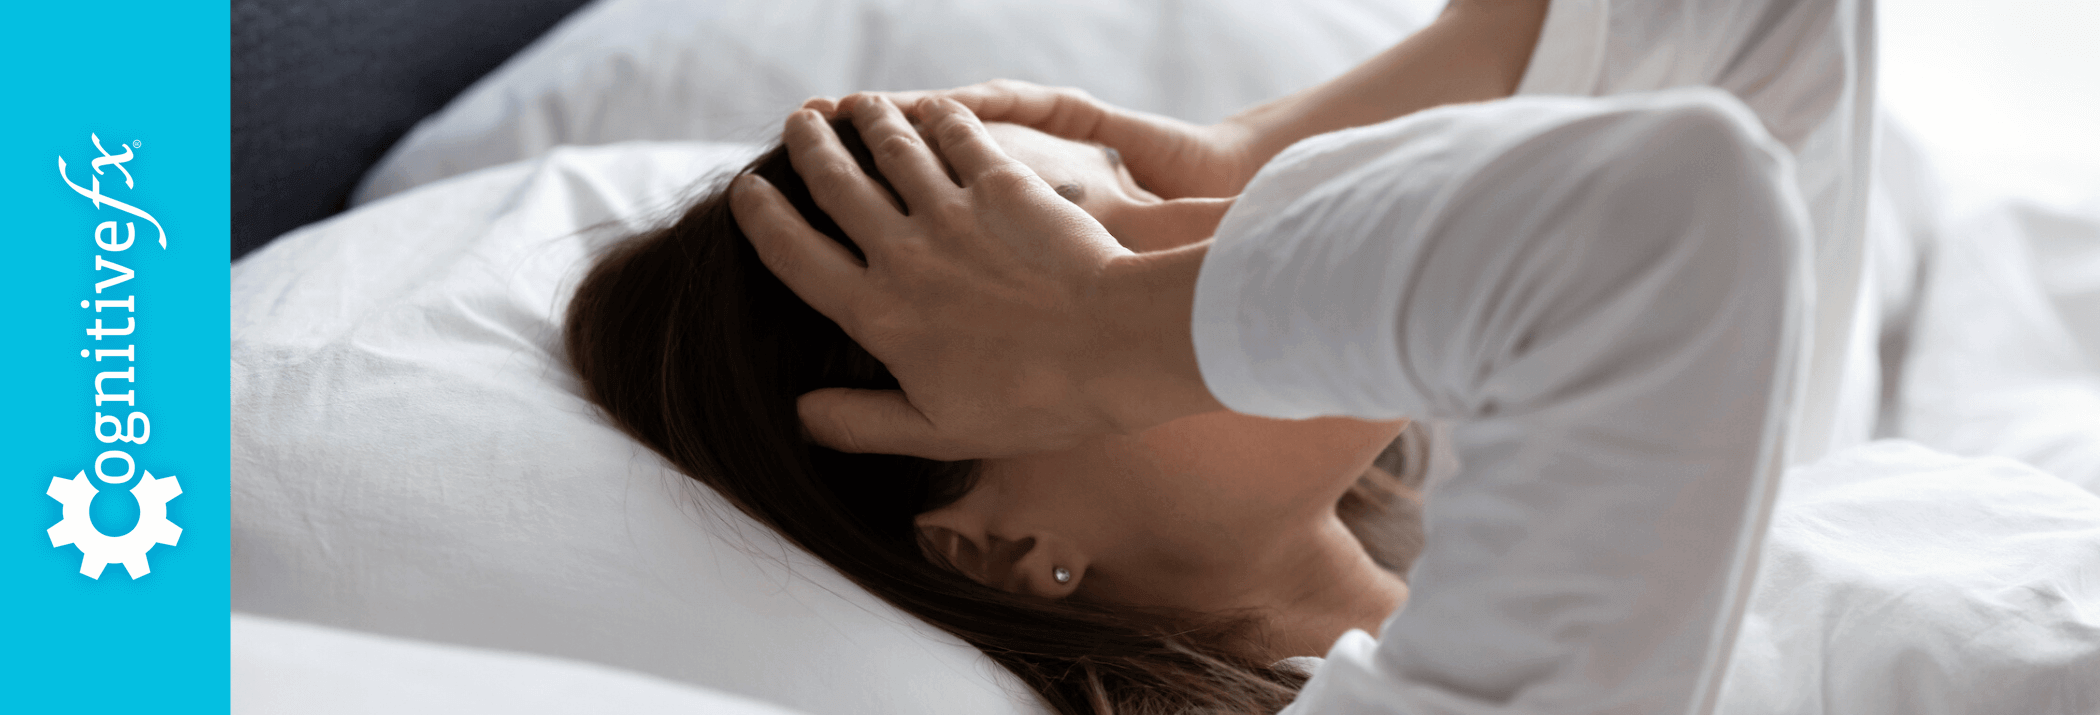 Post-Traumatic Headaches: Causes and Treatment Options